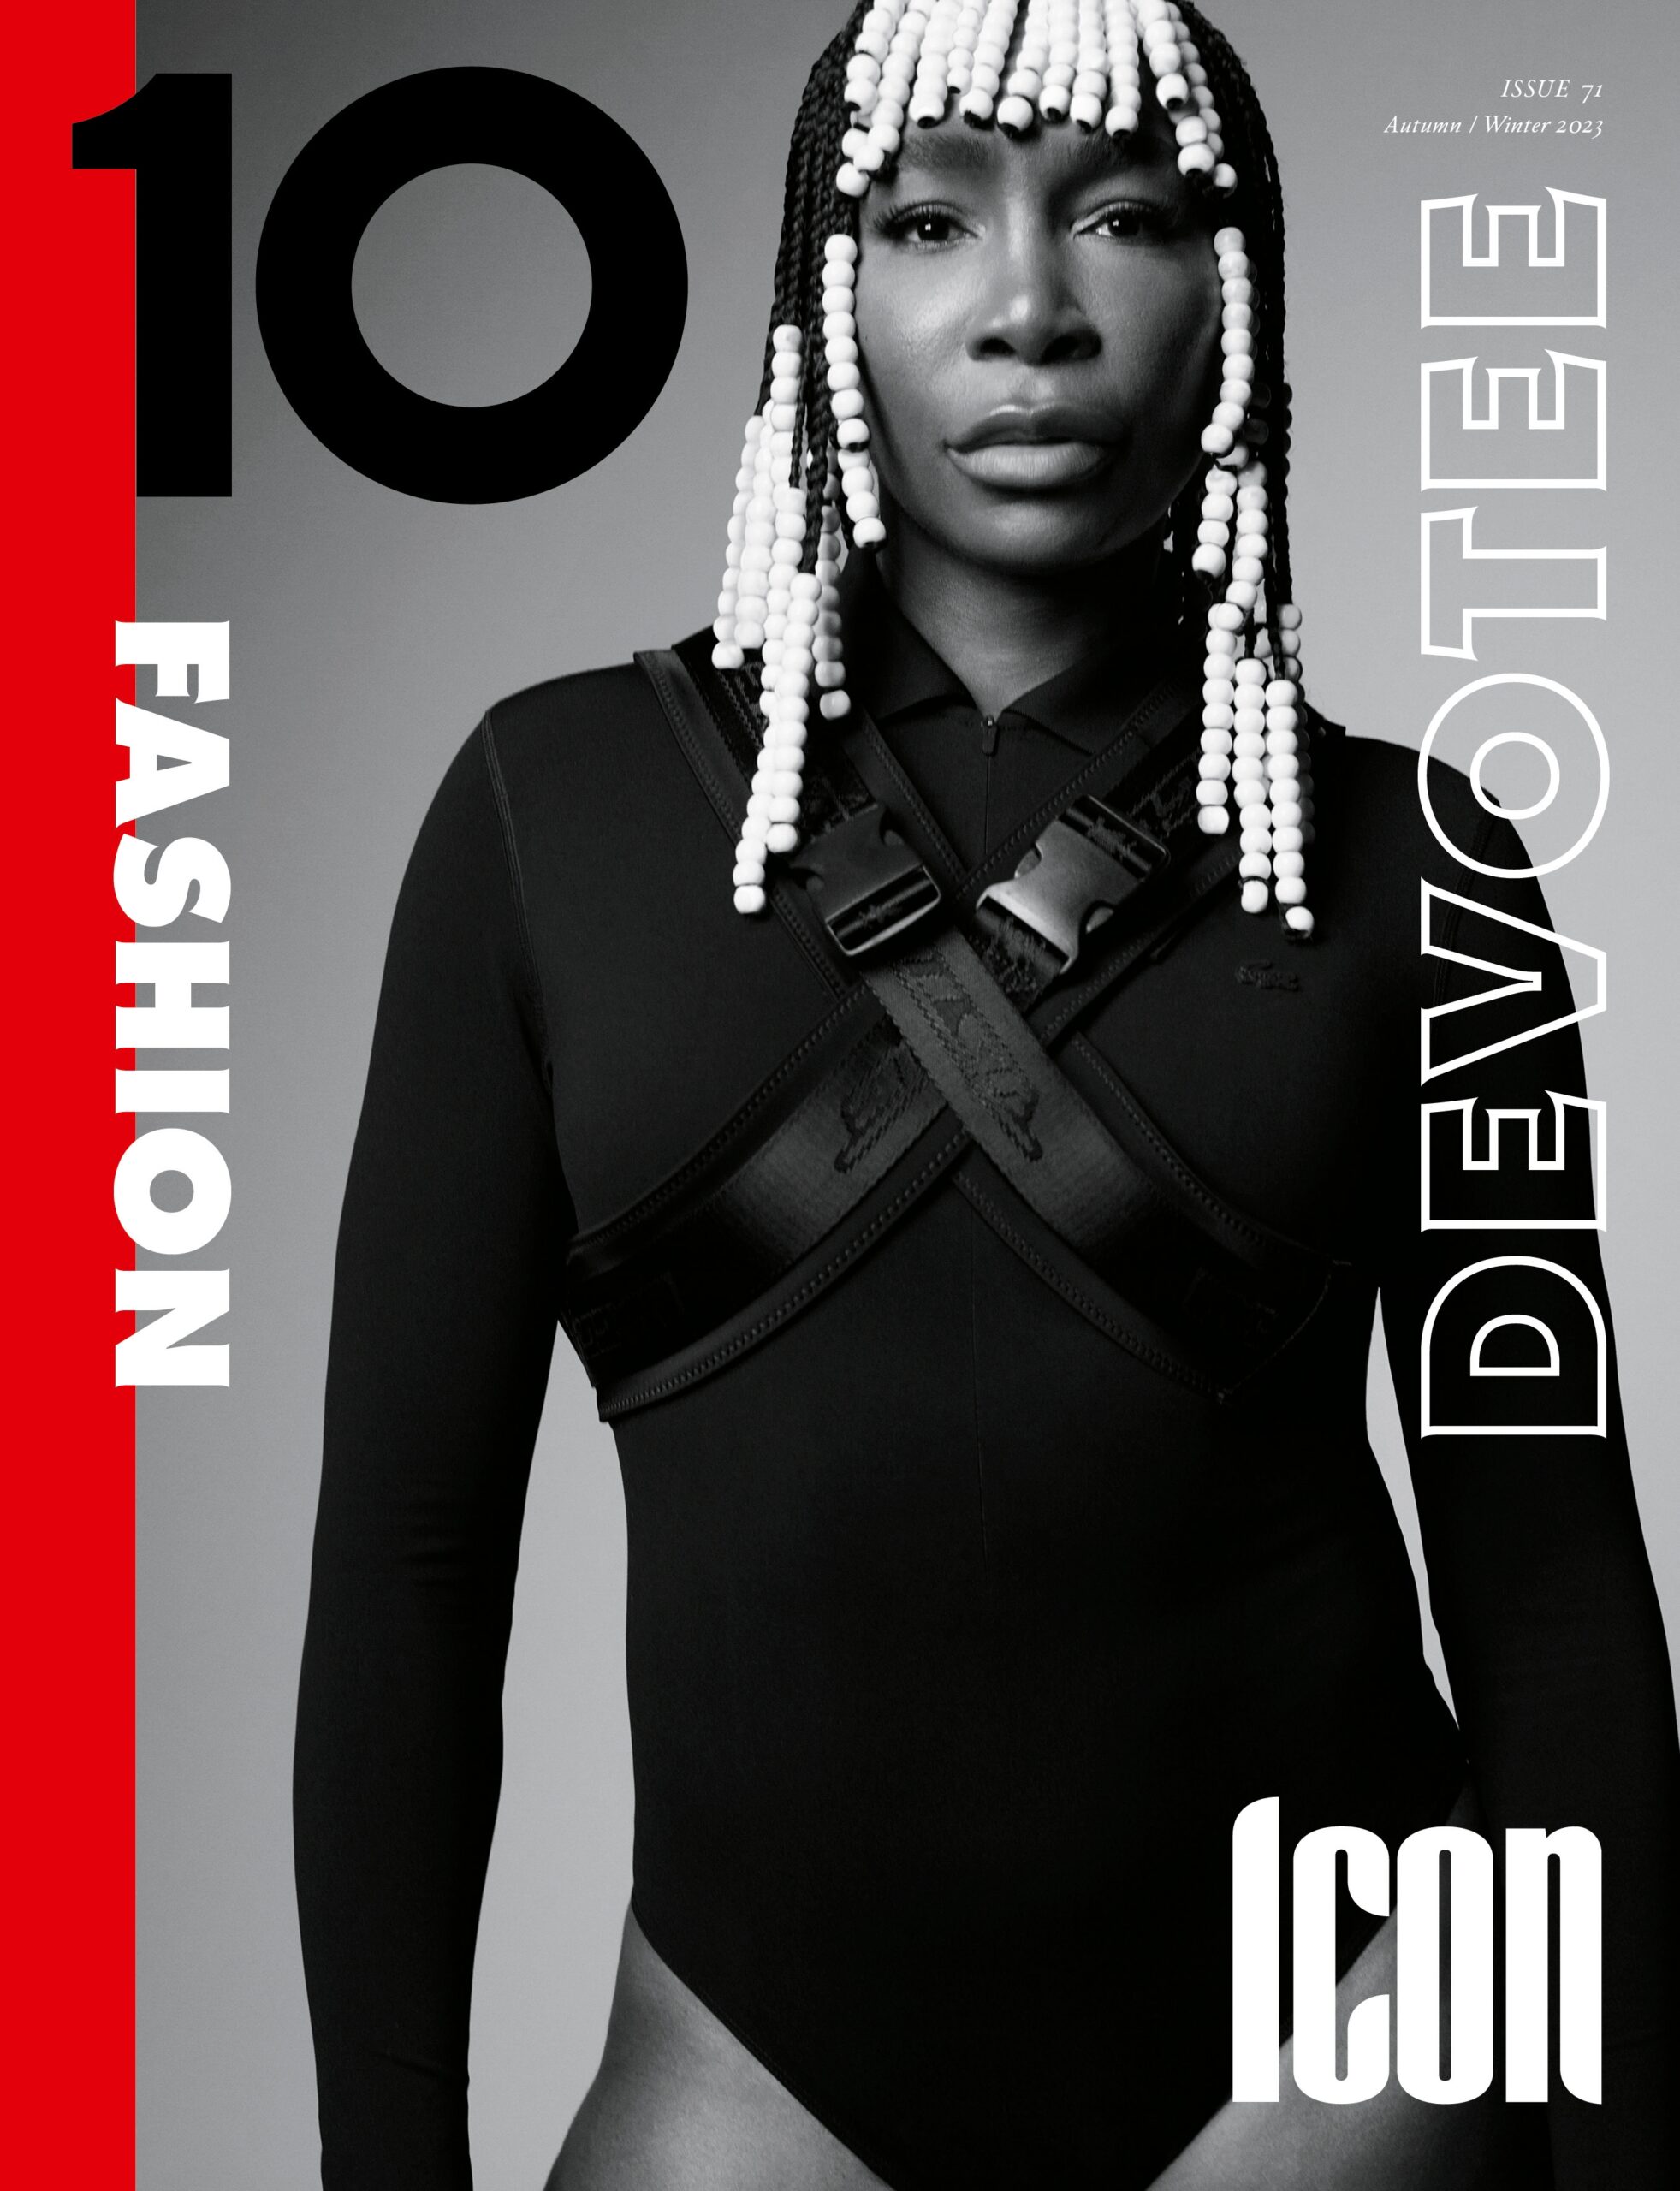 Tapestry-soho-frith-street-production-house-agency-london-10-magazine-tenmagazine-10curates-autumn-winter-issue-out-now-global-distribution-publications-publishing-reprographics-complete-services-campaigns-getintouch